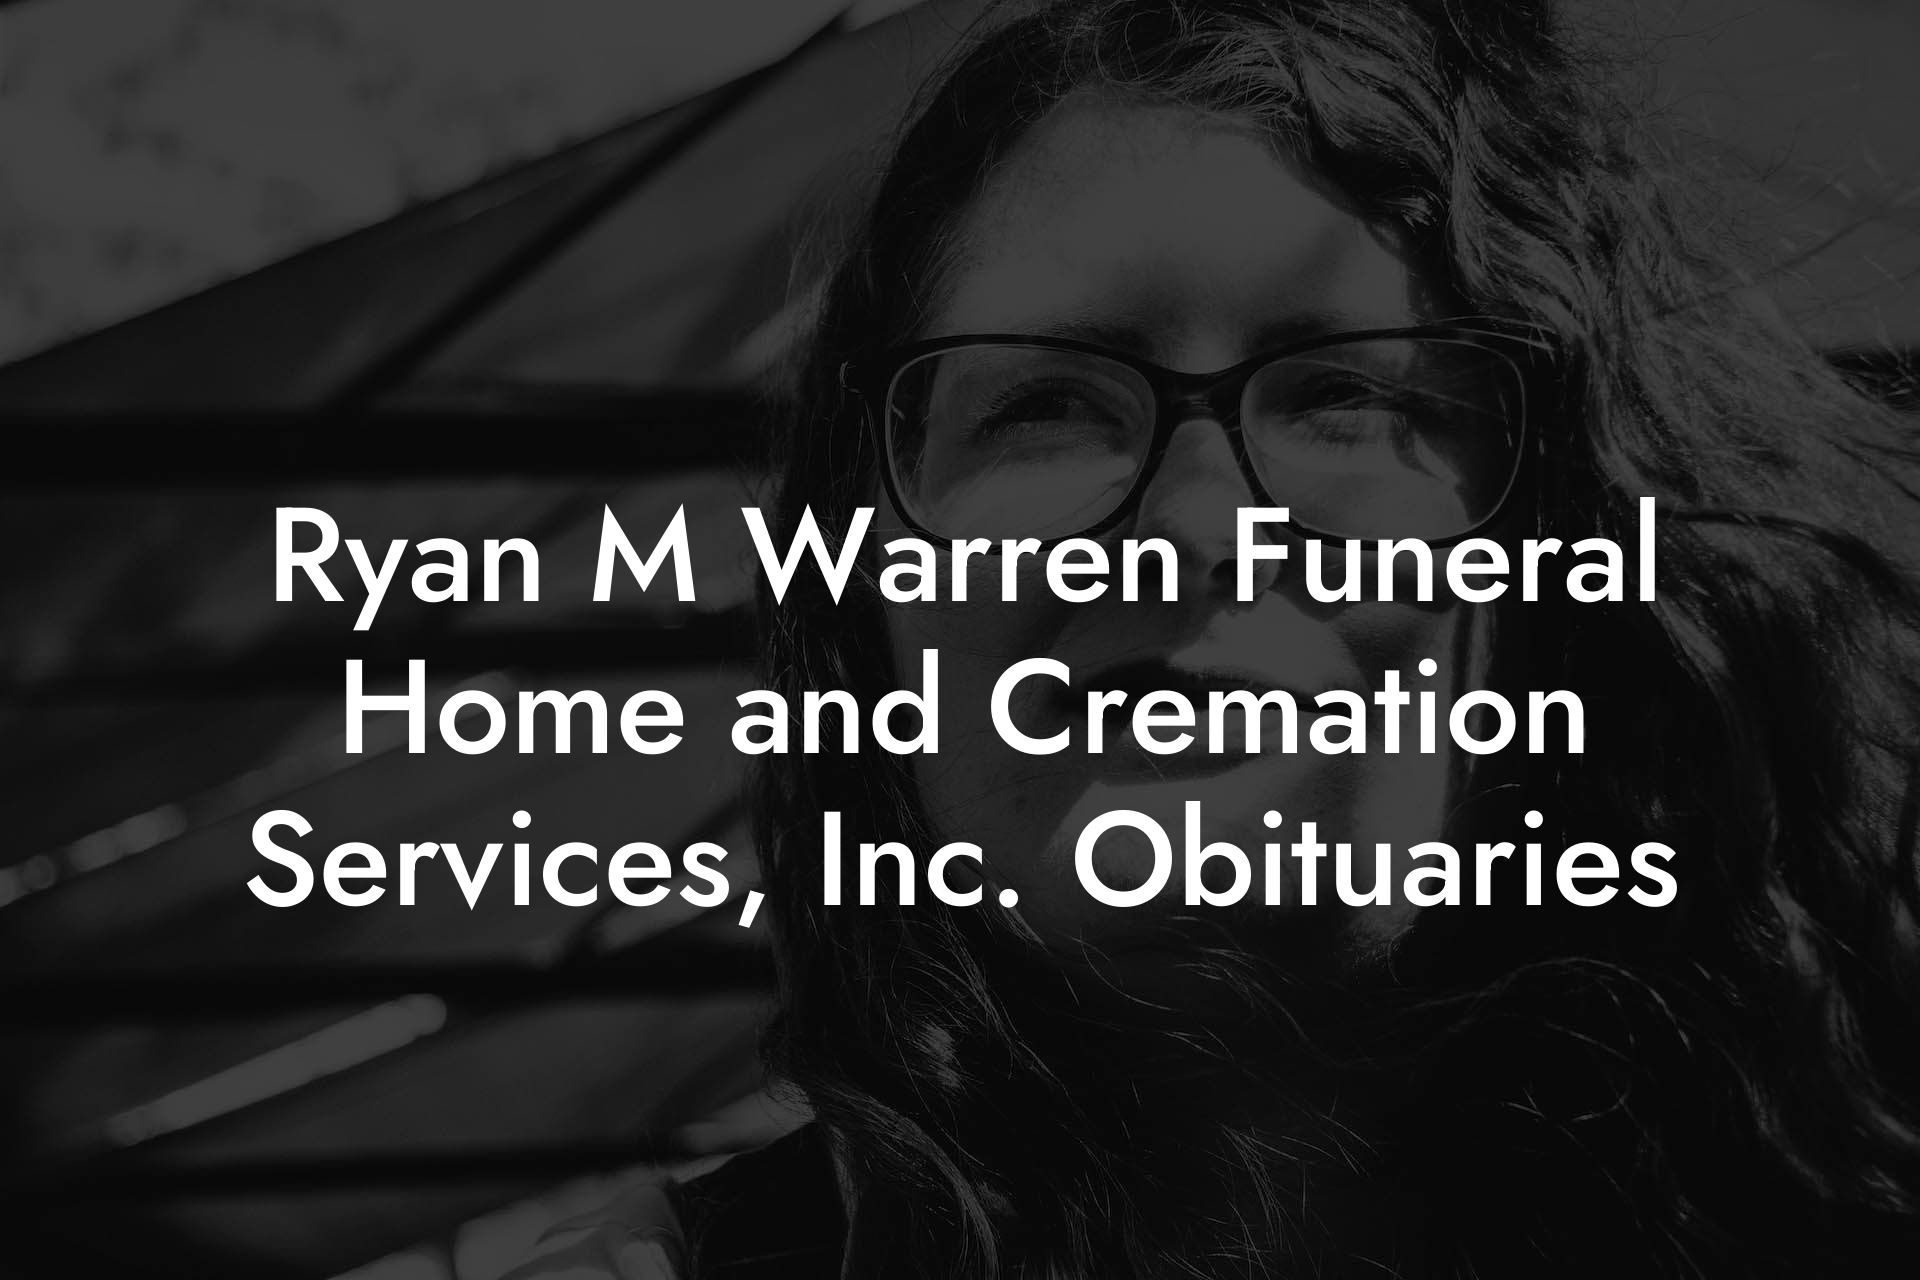 Ryan M Warren Funeral Home and Cremation Services, Inc. Obituaries